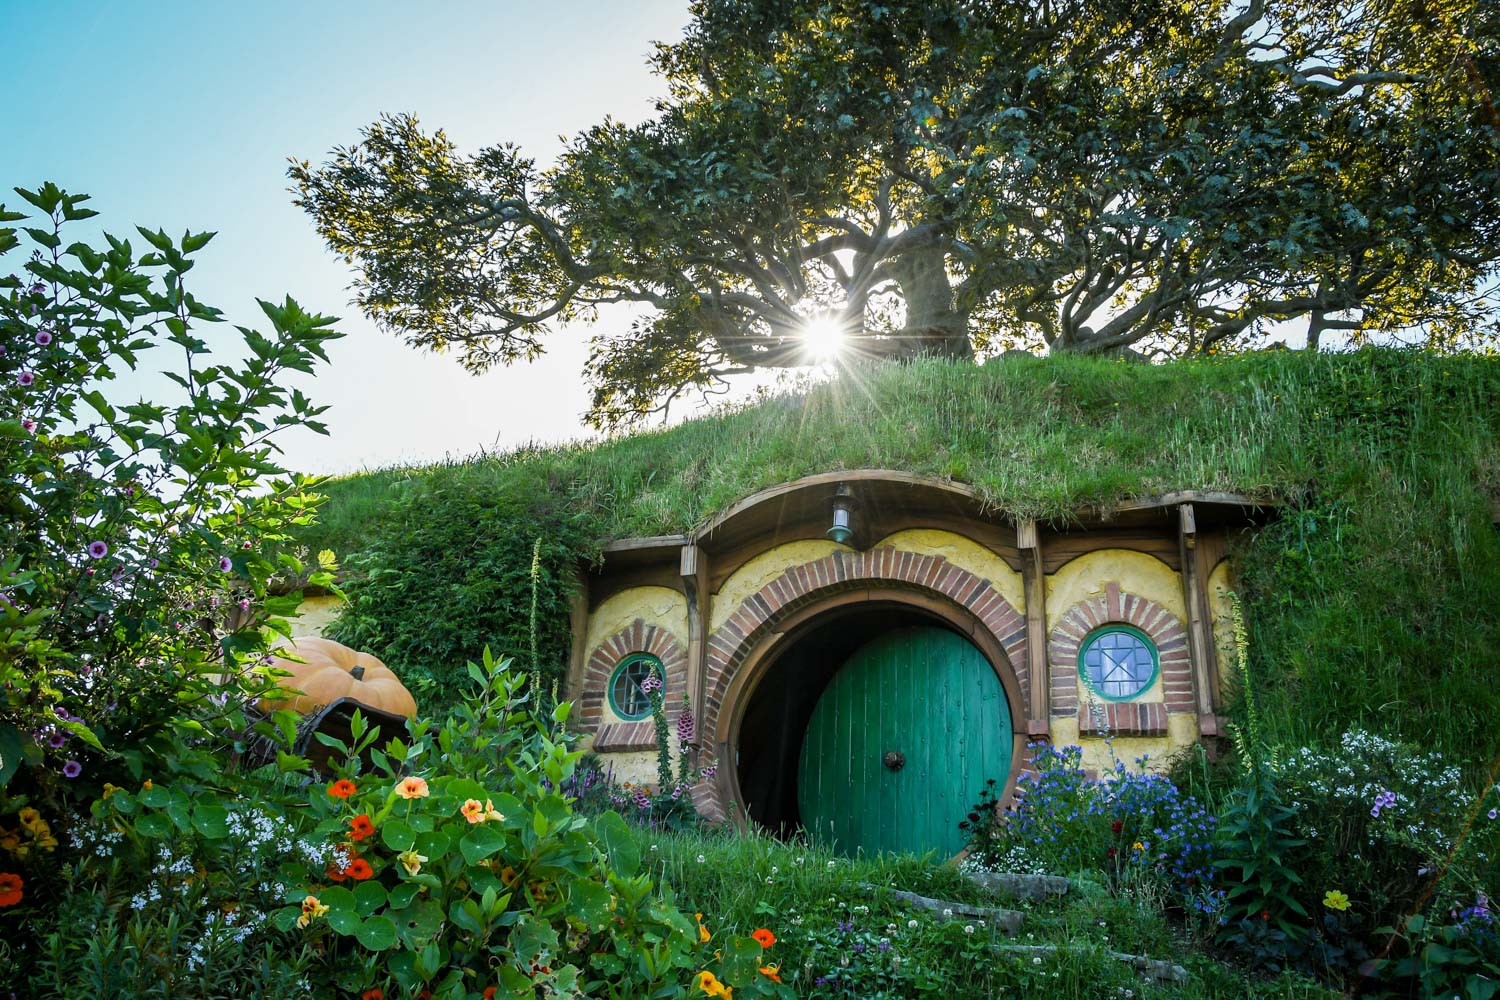 Top Things to Do in New Zealand Visit Hobbiton